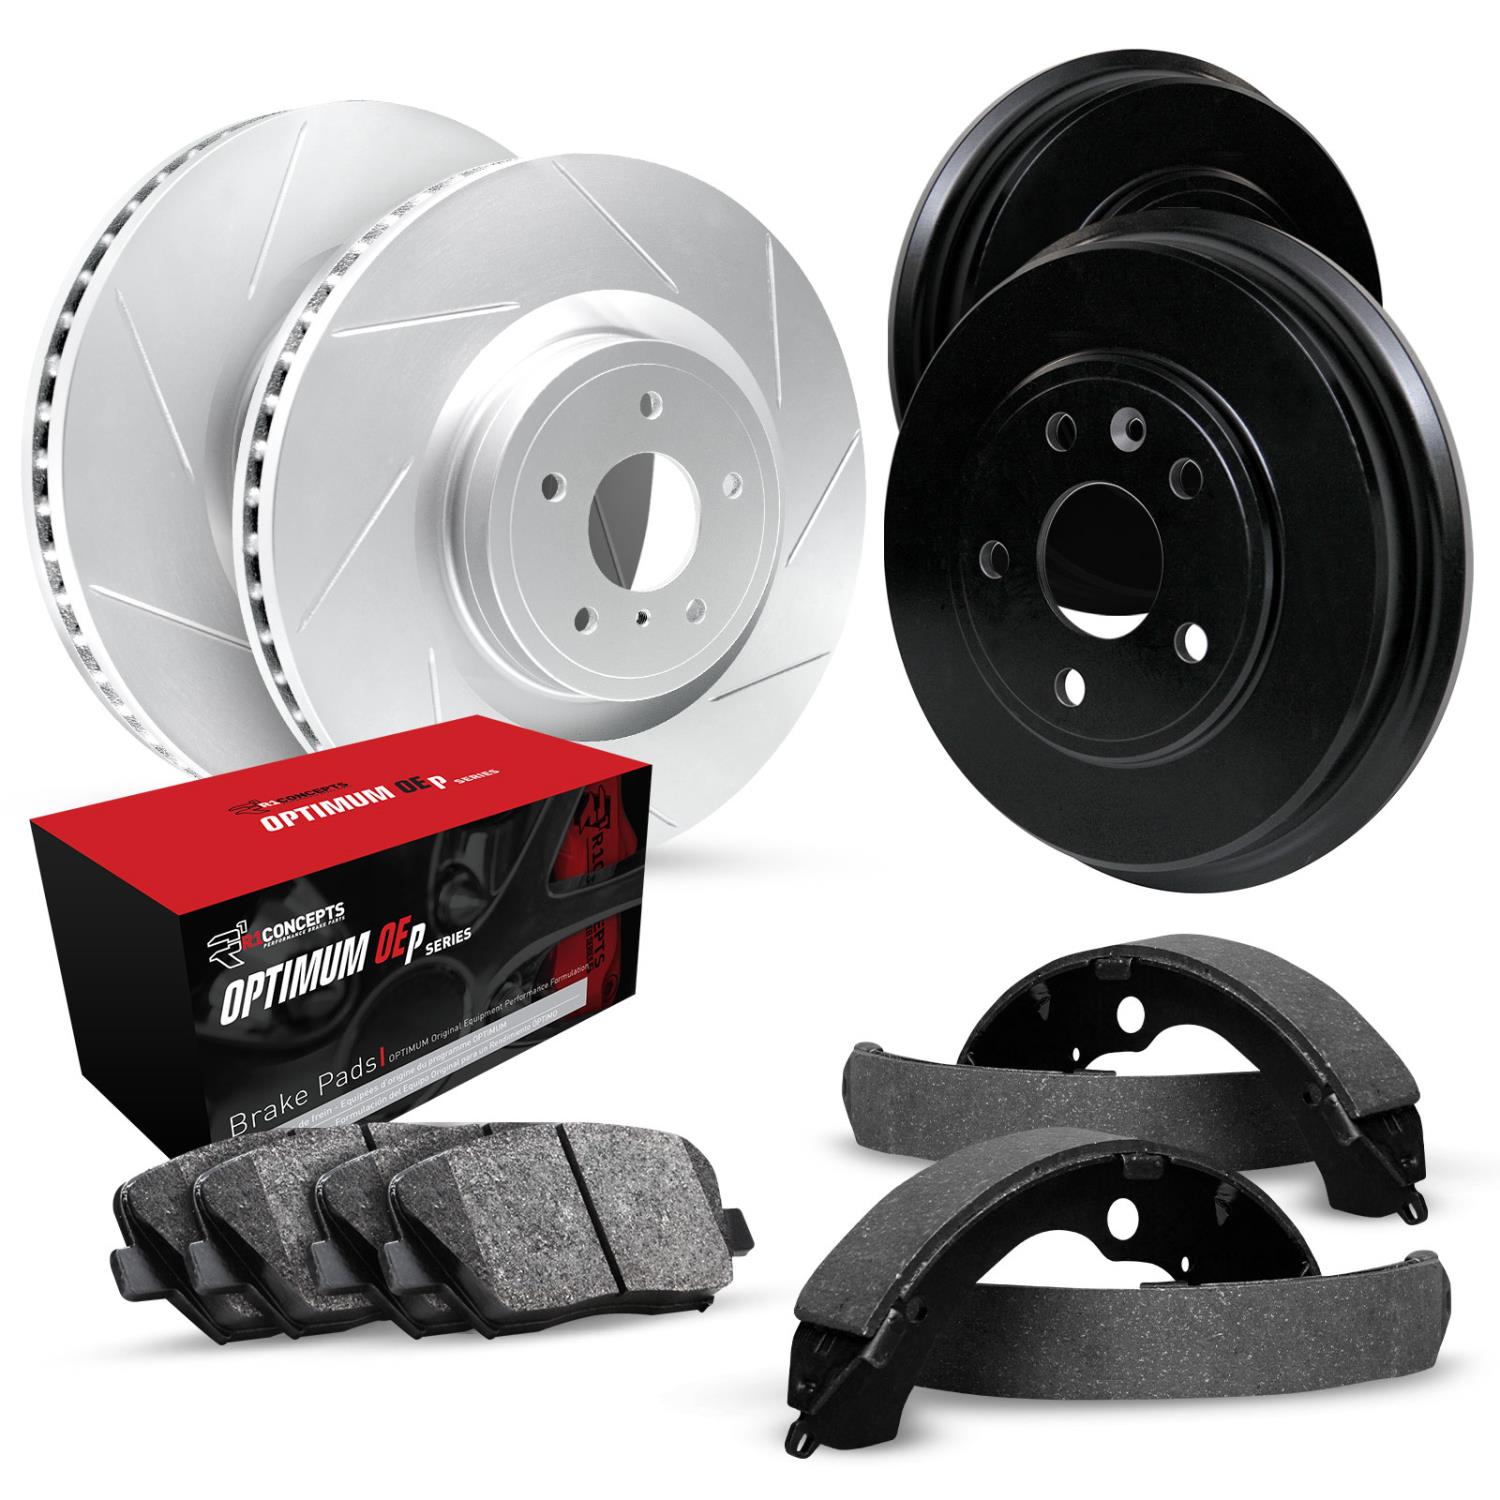 GEO-Carbon Slotted Brake Rotor & Drum Set w/Optimum OE Pads & Shoes, 2000-2001 Infiniti/Nissan, Position: Front & Rear